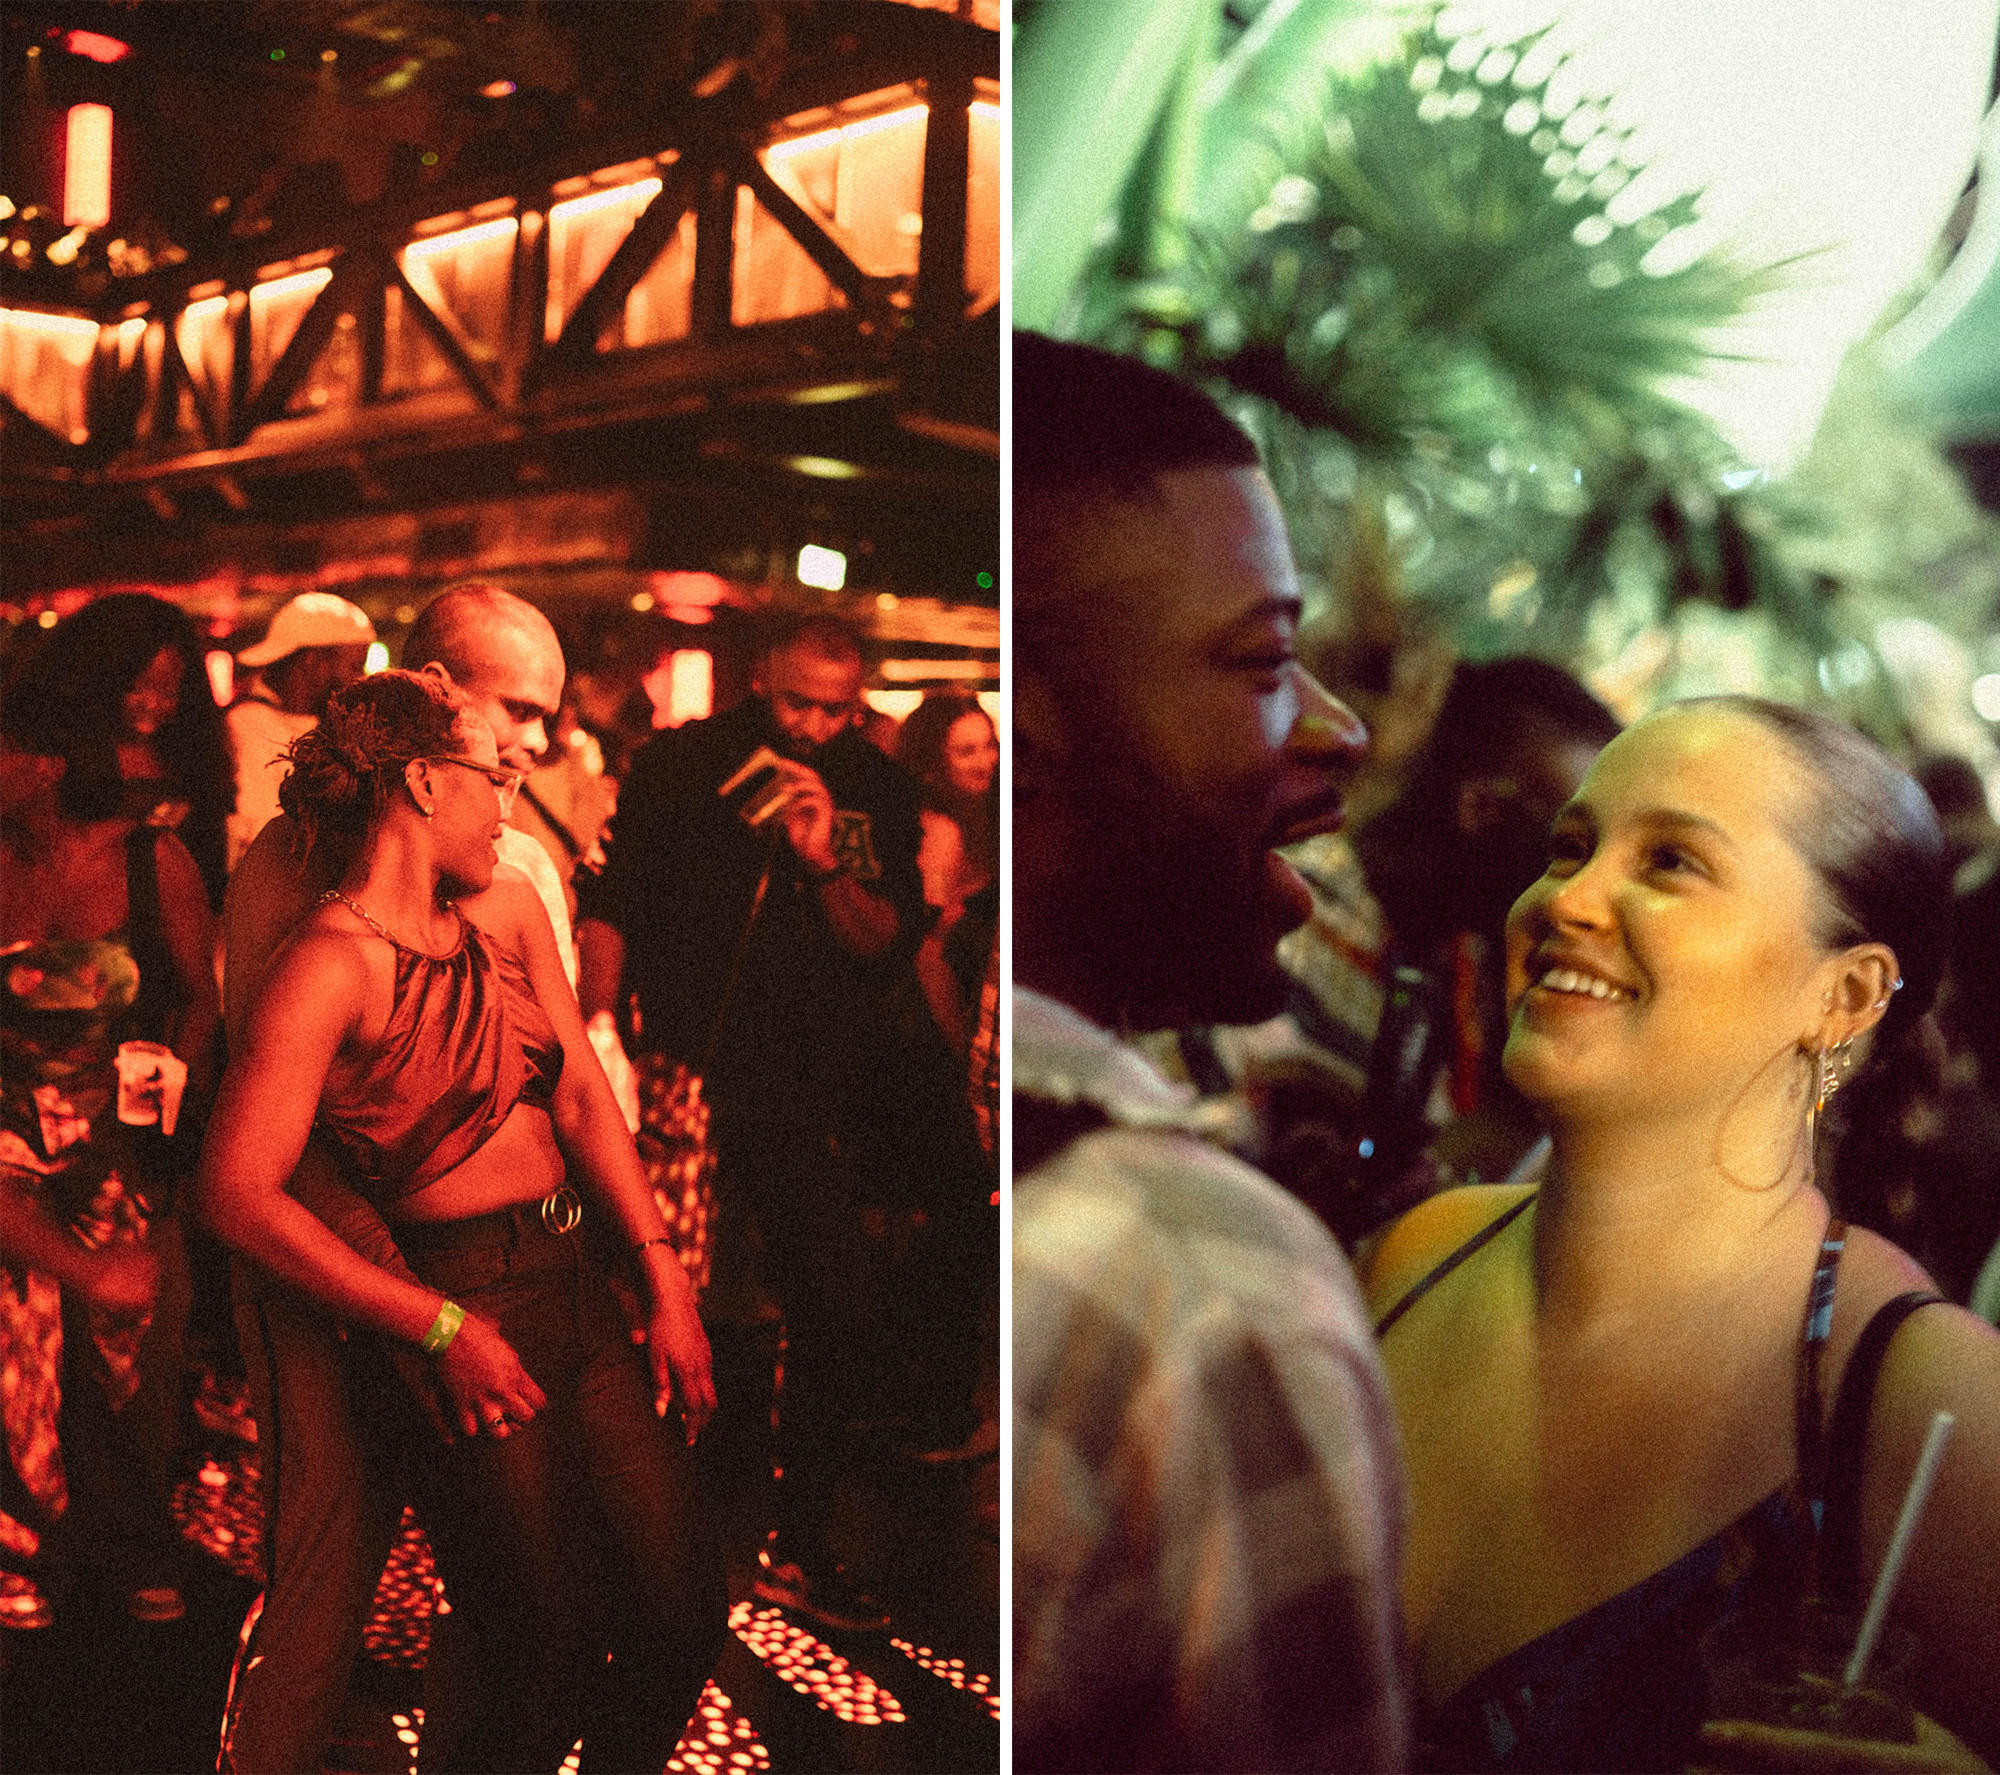 Left: An image of a Black couple dancinig in a club. Right: An image of a Black couple pausing while smiling in a club.